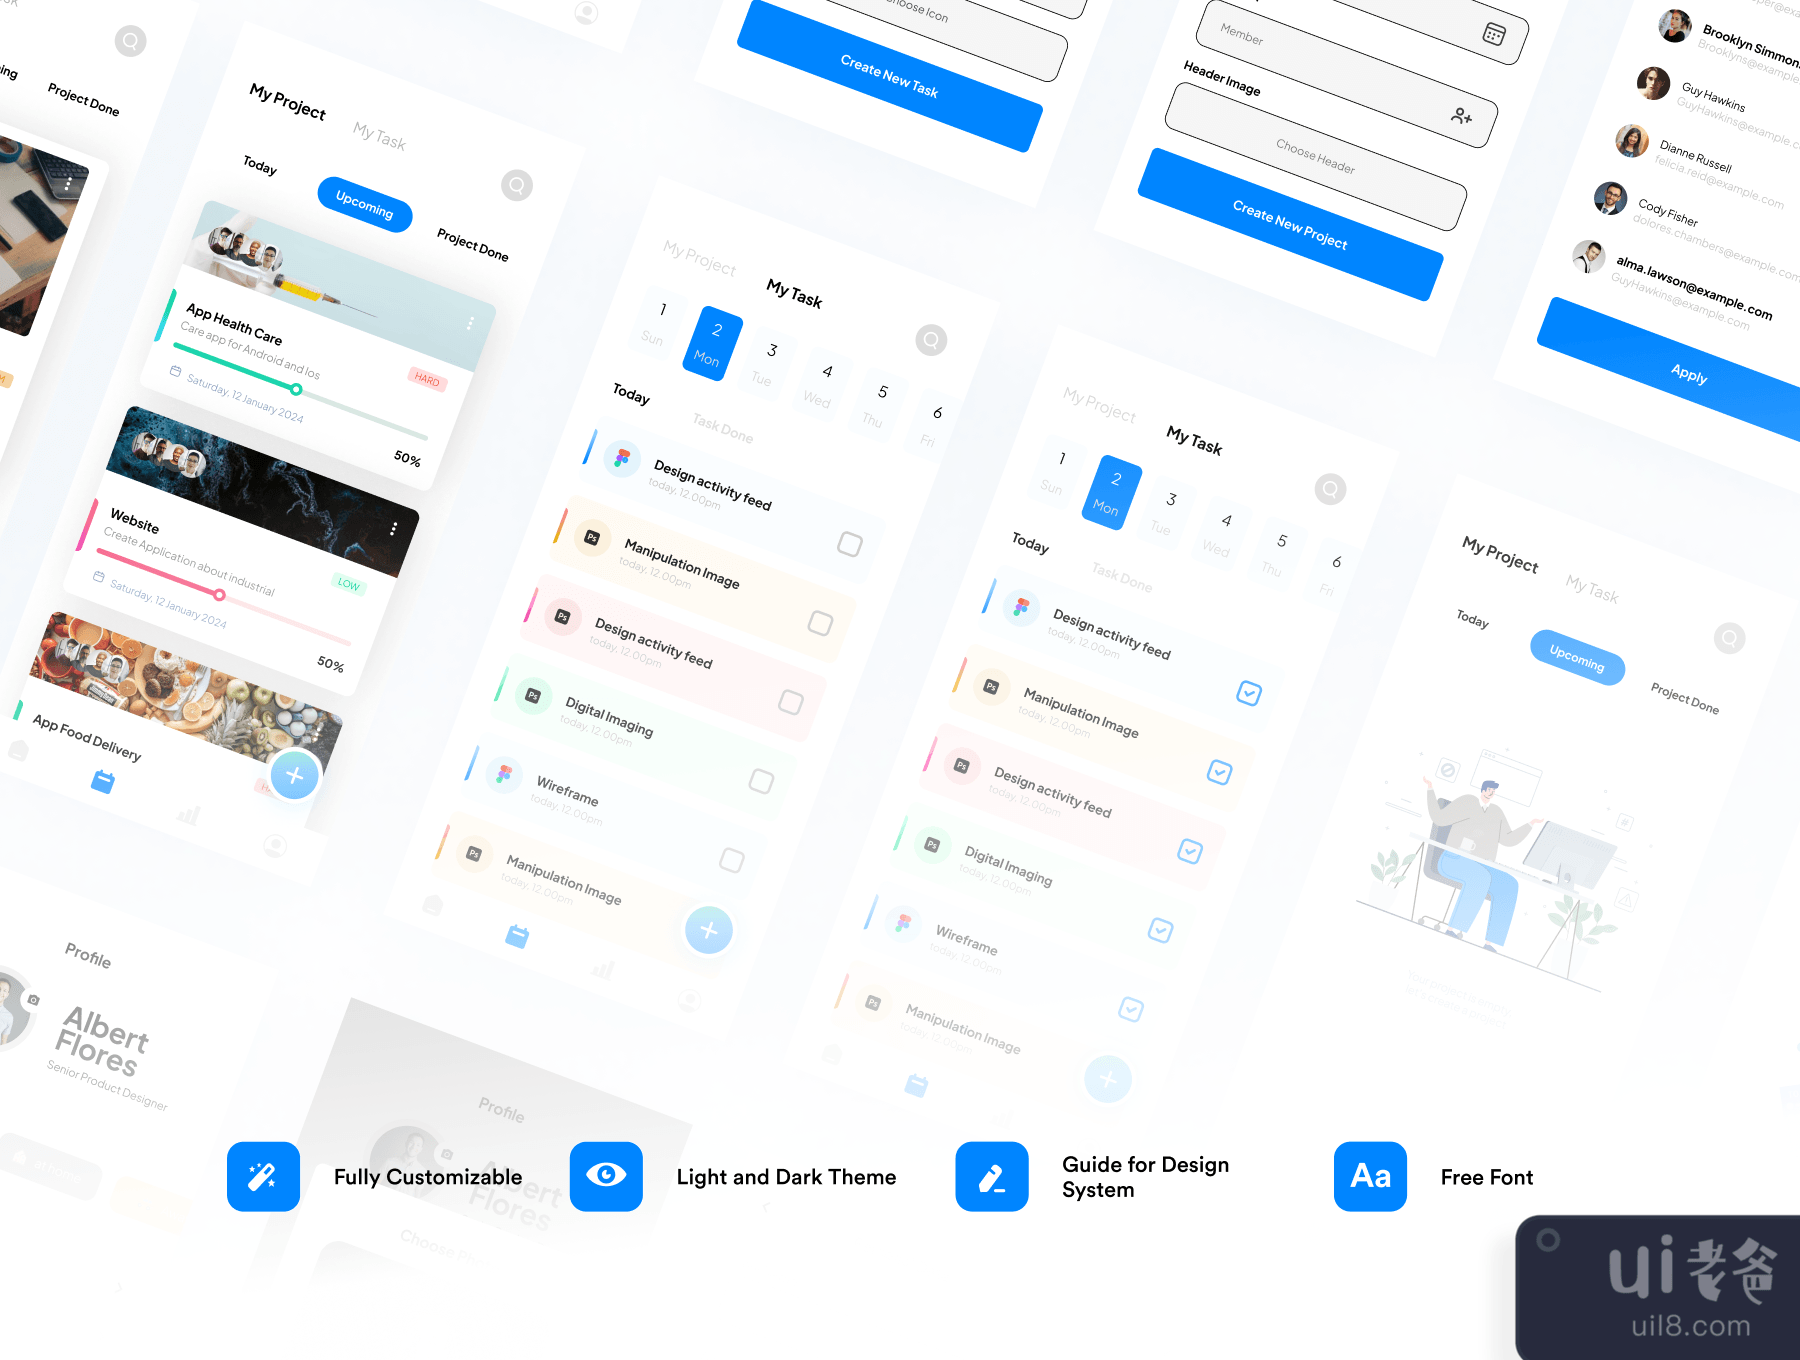 Toyou - 任务管理移动应用 (Toyou - Task Management Mobile Apps)插图4